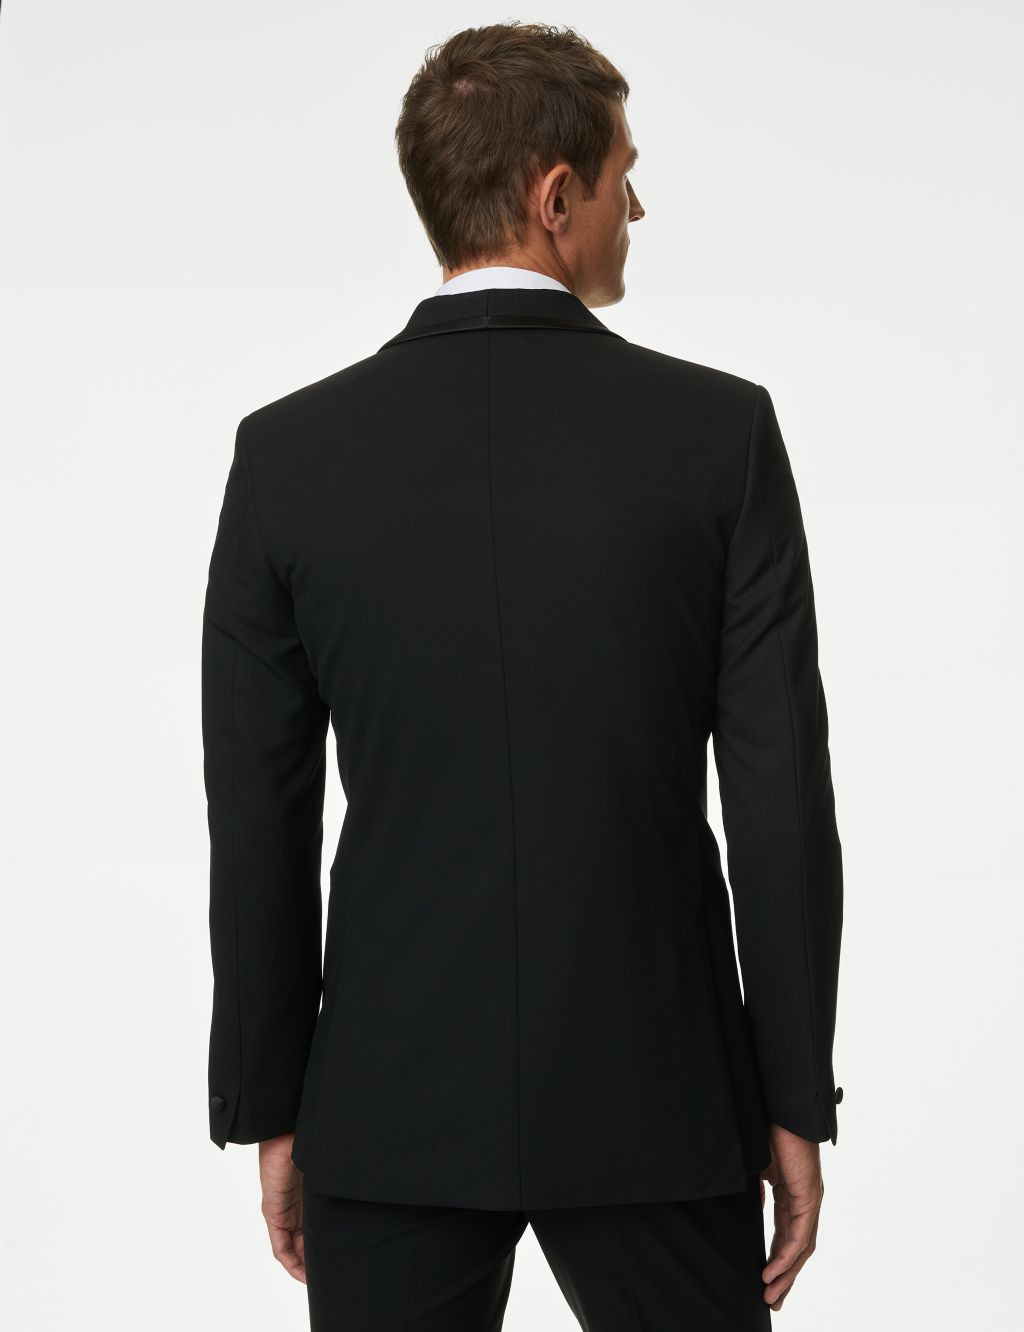 Slim Fit Stretch Tuxedo Jacket | M&S Collection | M&S